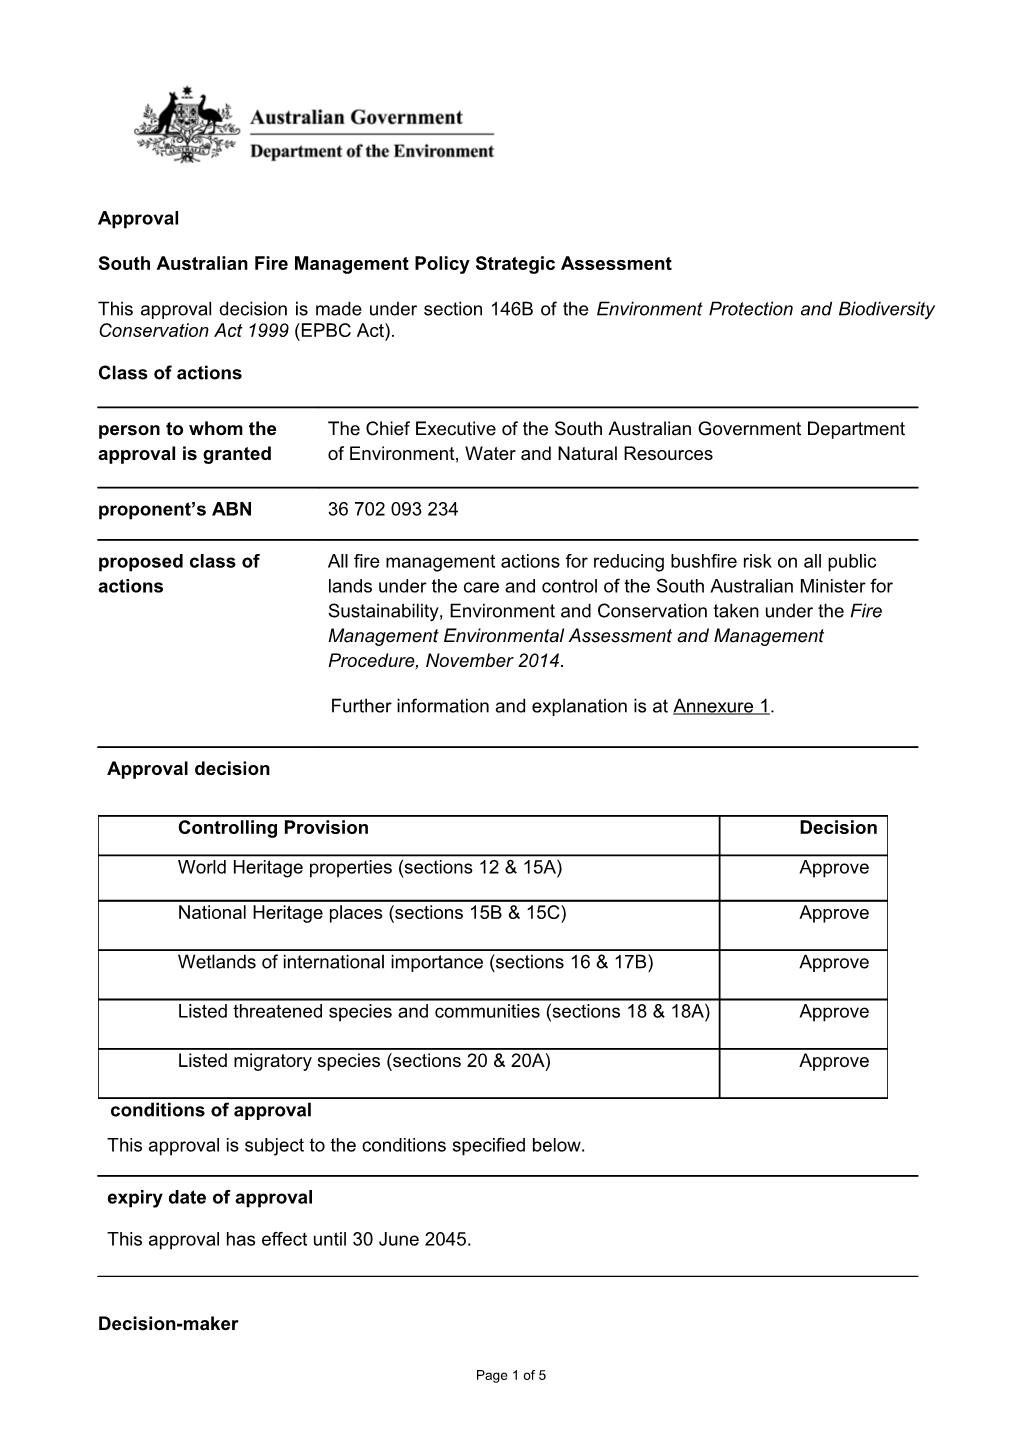 Approval - South Australian Fire Management Policy Strategic Assessment